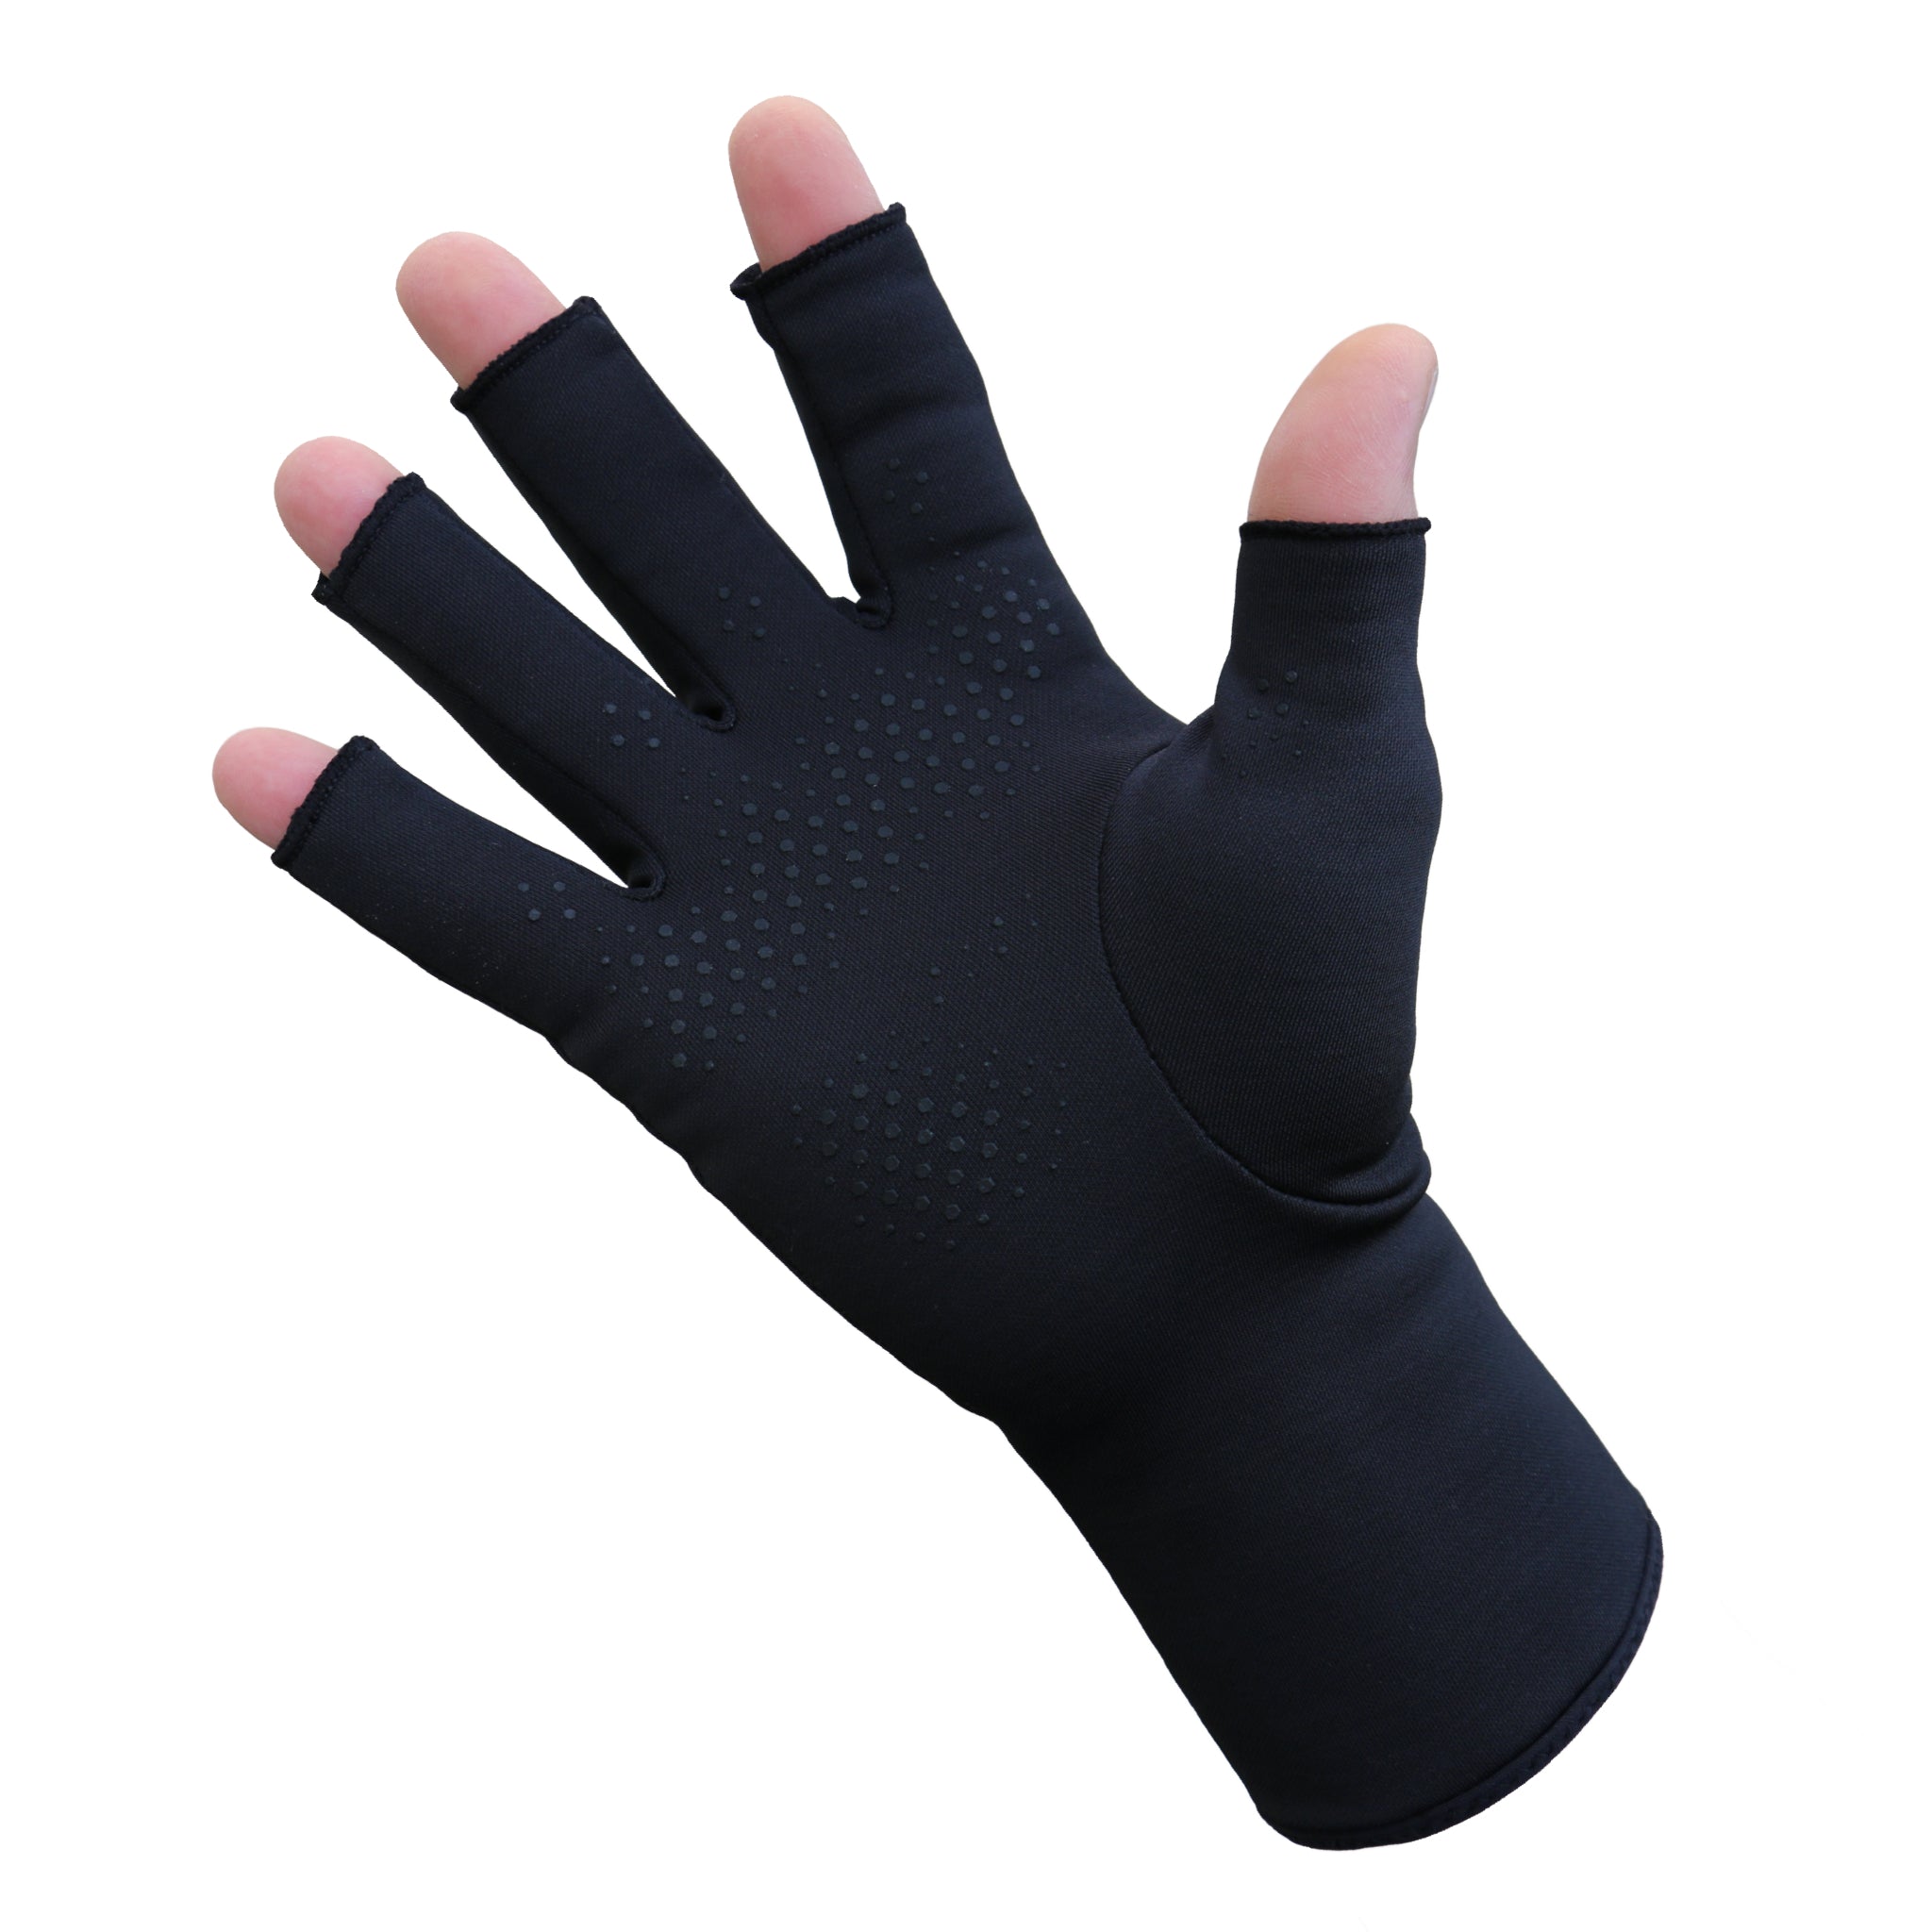 Infrared Fleece Open Finger Gloves Palm Grip - Raynaud's Syndrome – Gloves  for Therapy by Veturo